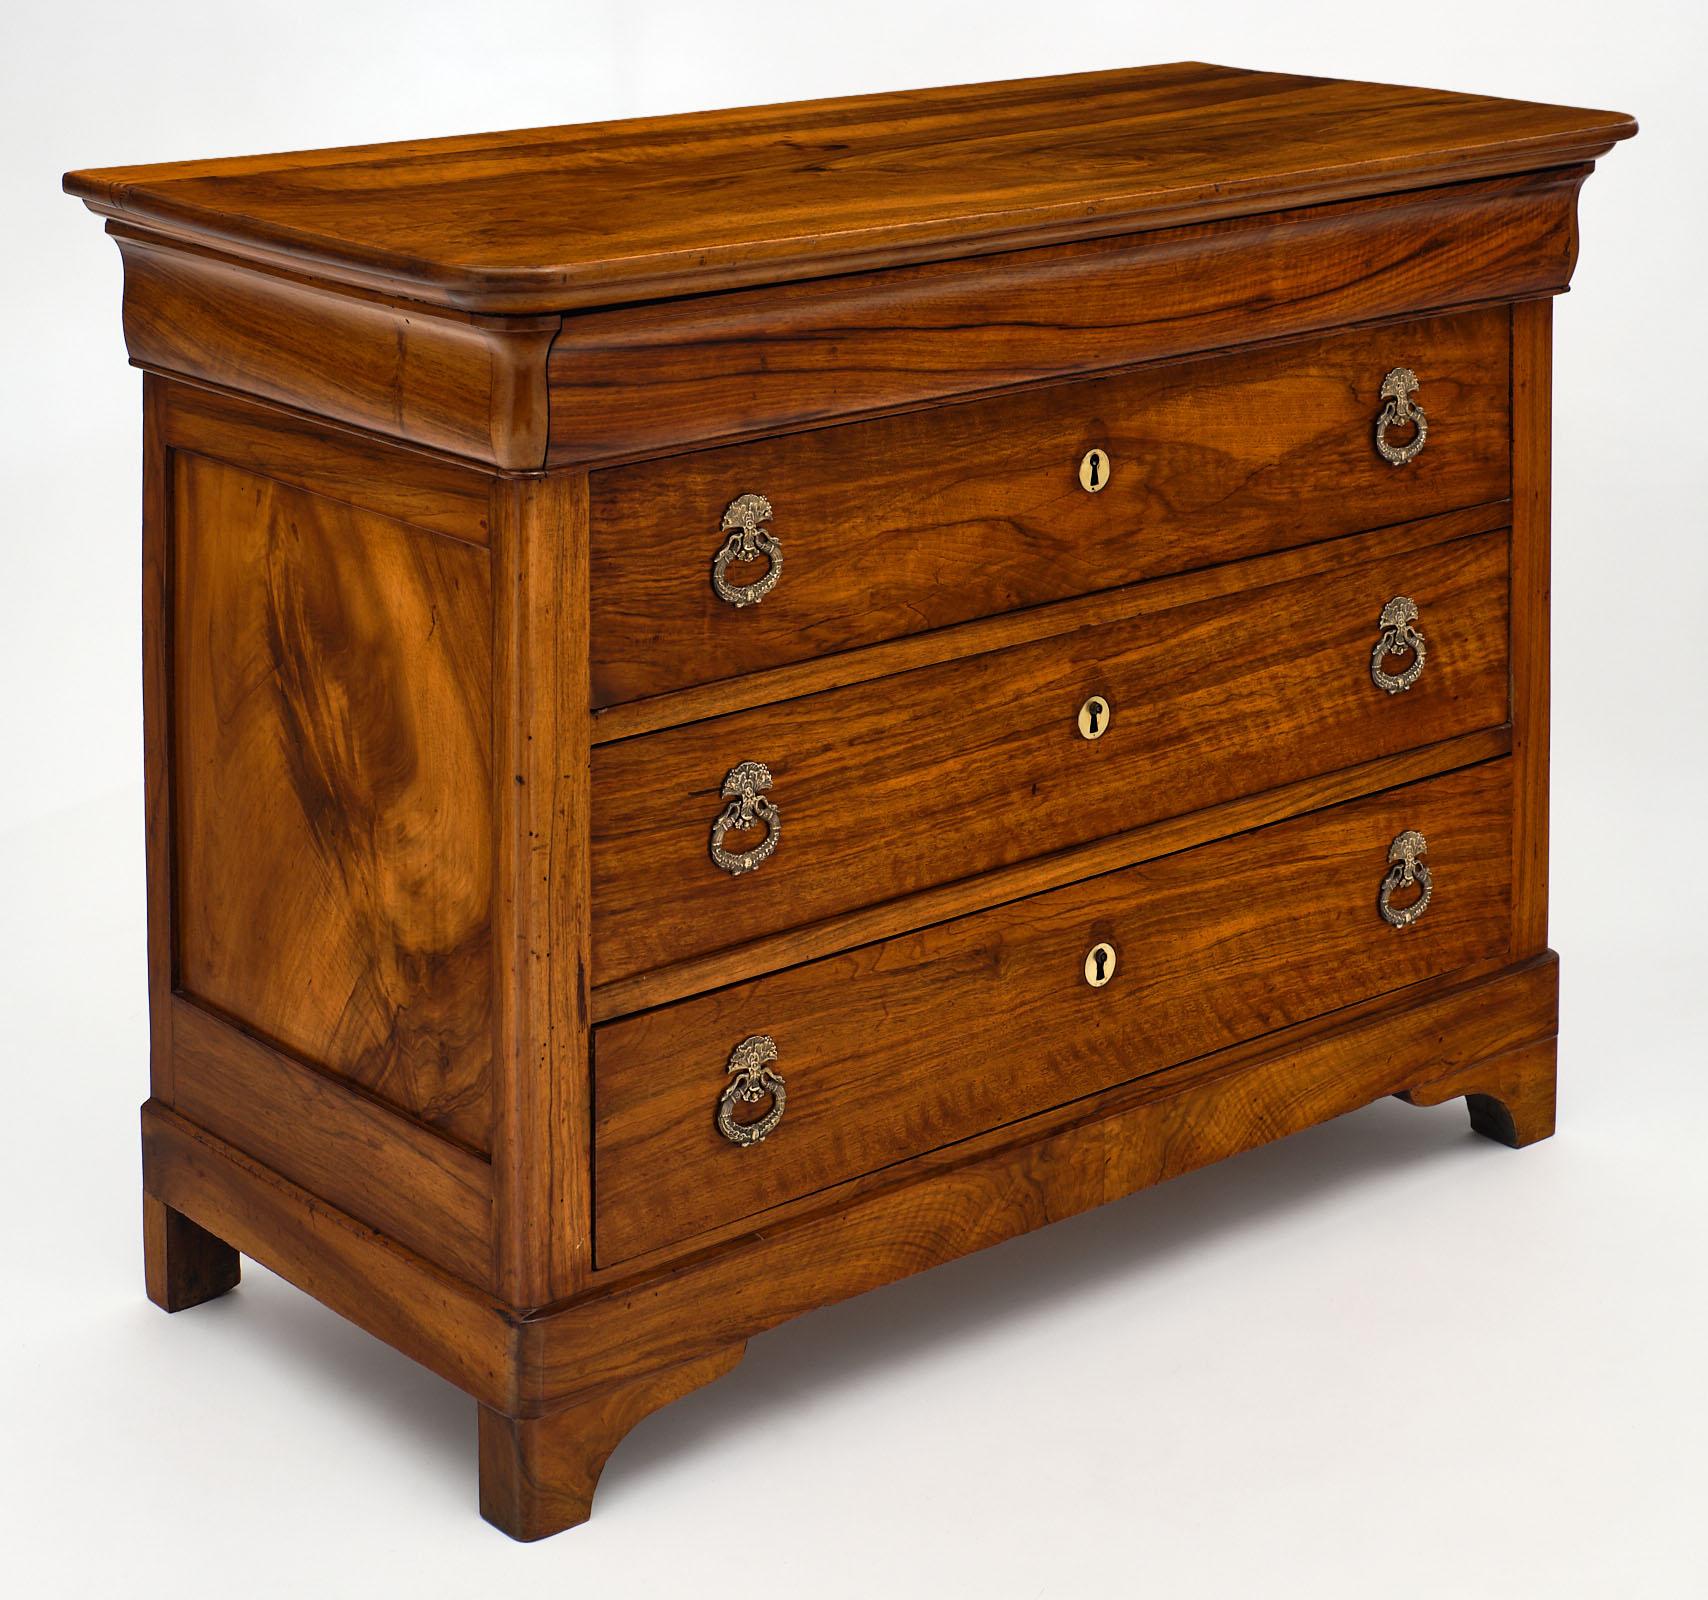 French antique figured walnut chest featuring four dovetailed drawers. This solid piece is from the Rhone Valley in France and has a beautiful, honey toned patina. It has been finished with a lustrous French polish and beeswax. We love the original